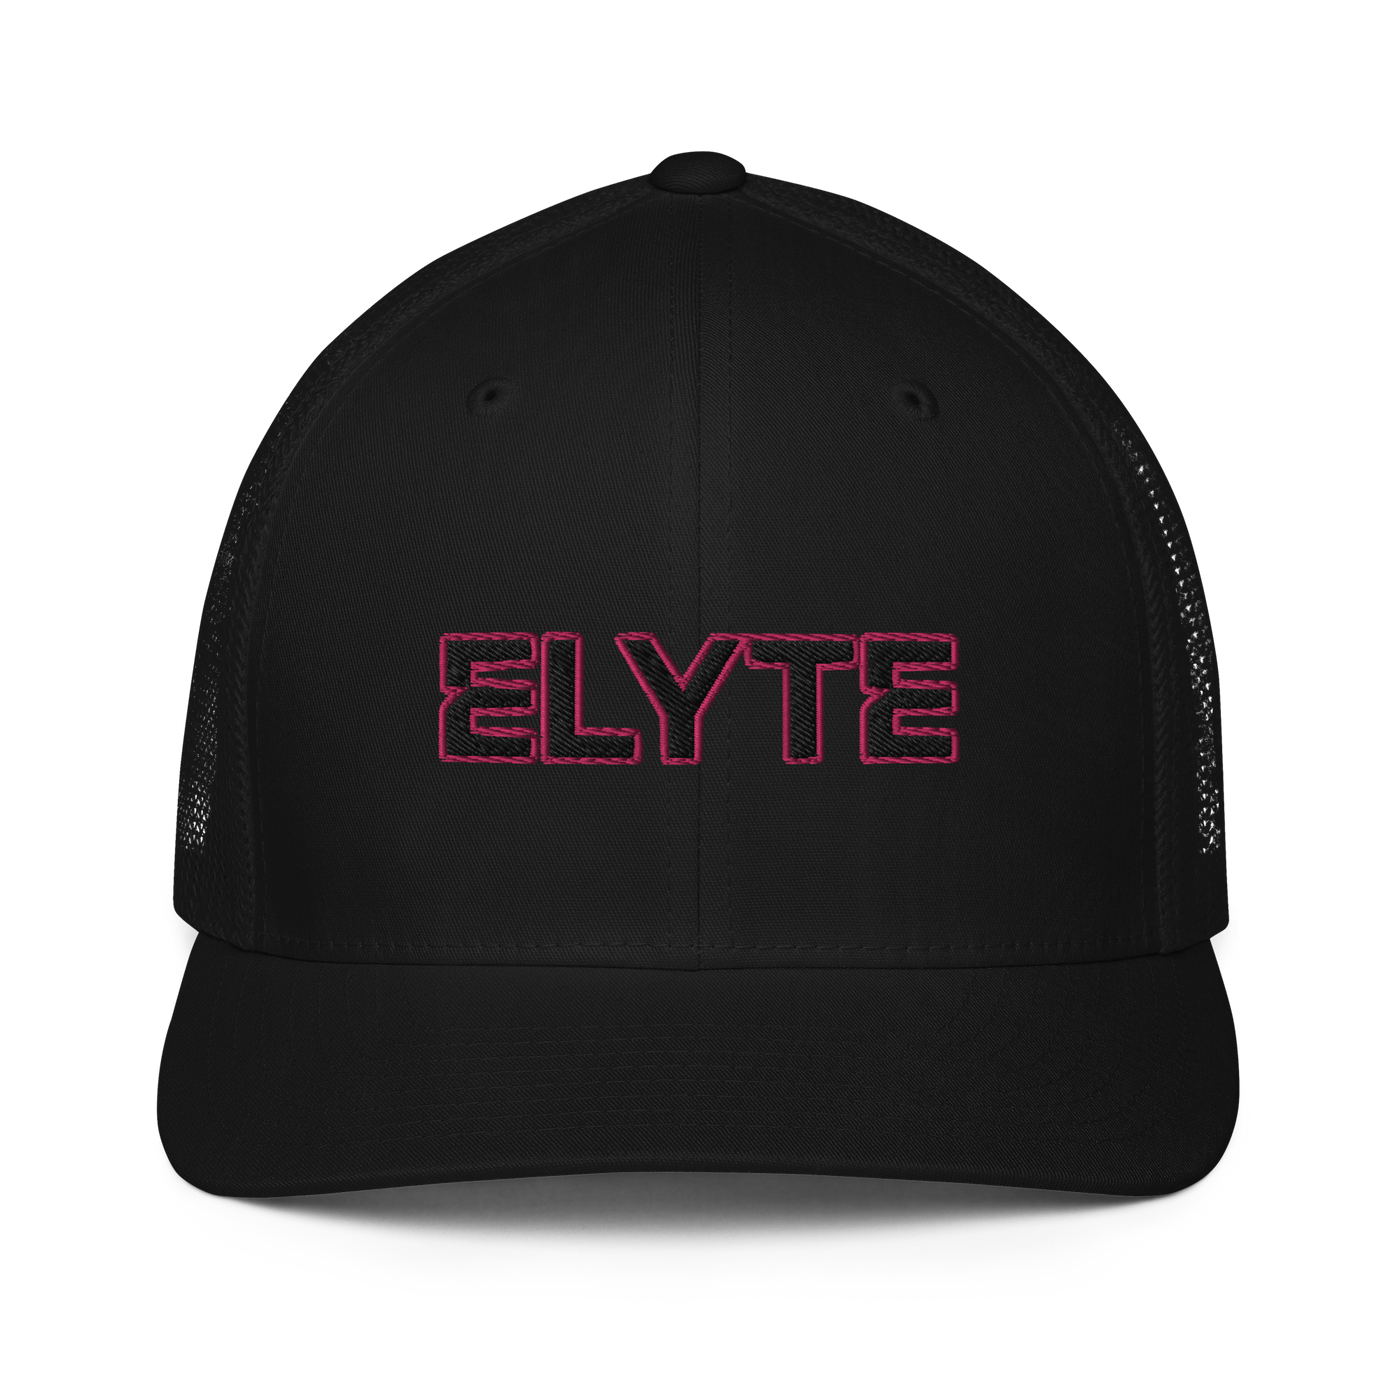 ELYTE Chic Fitted Cap with Pink Accent